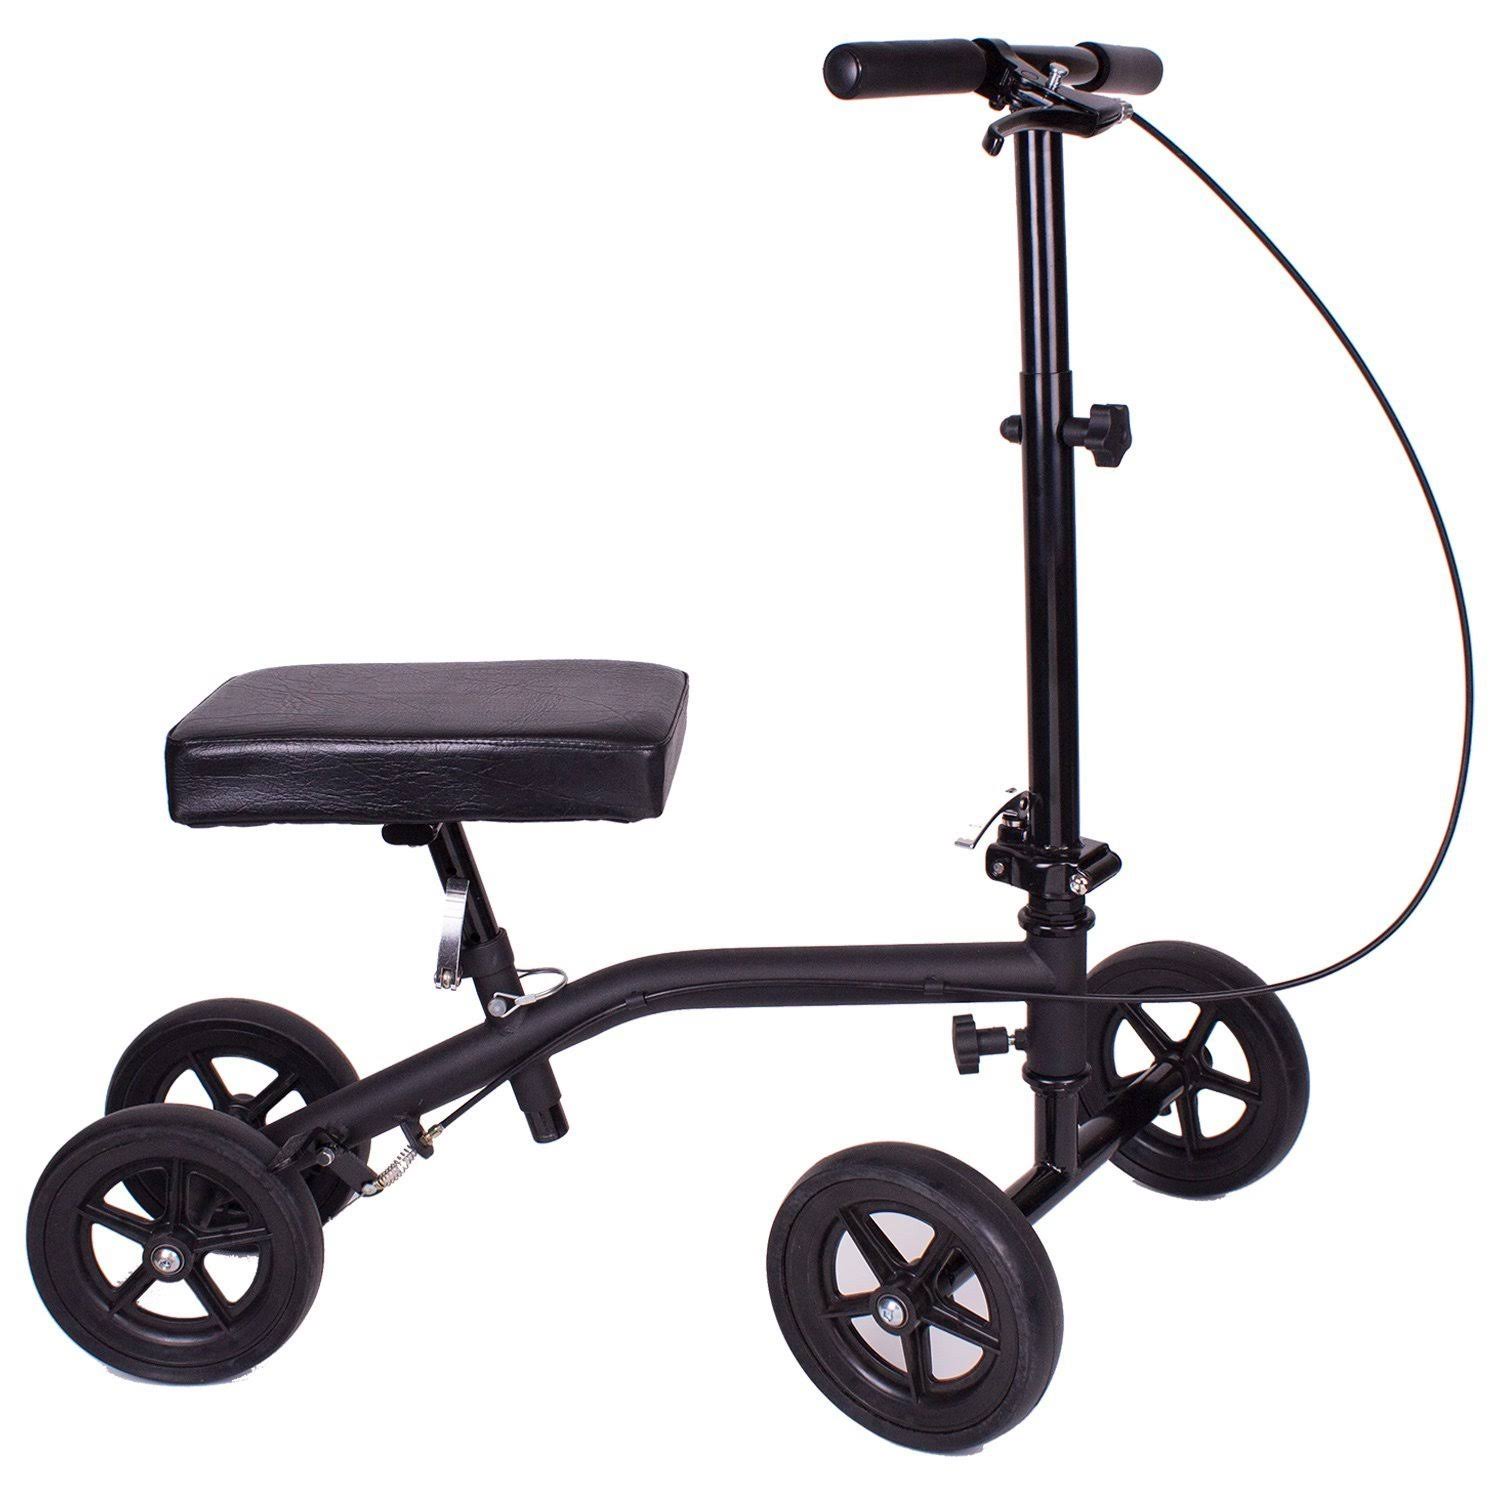 Carex Knee Walker Scooter with Padded Knee Seat